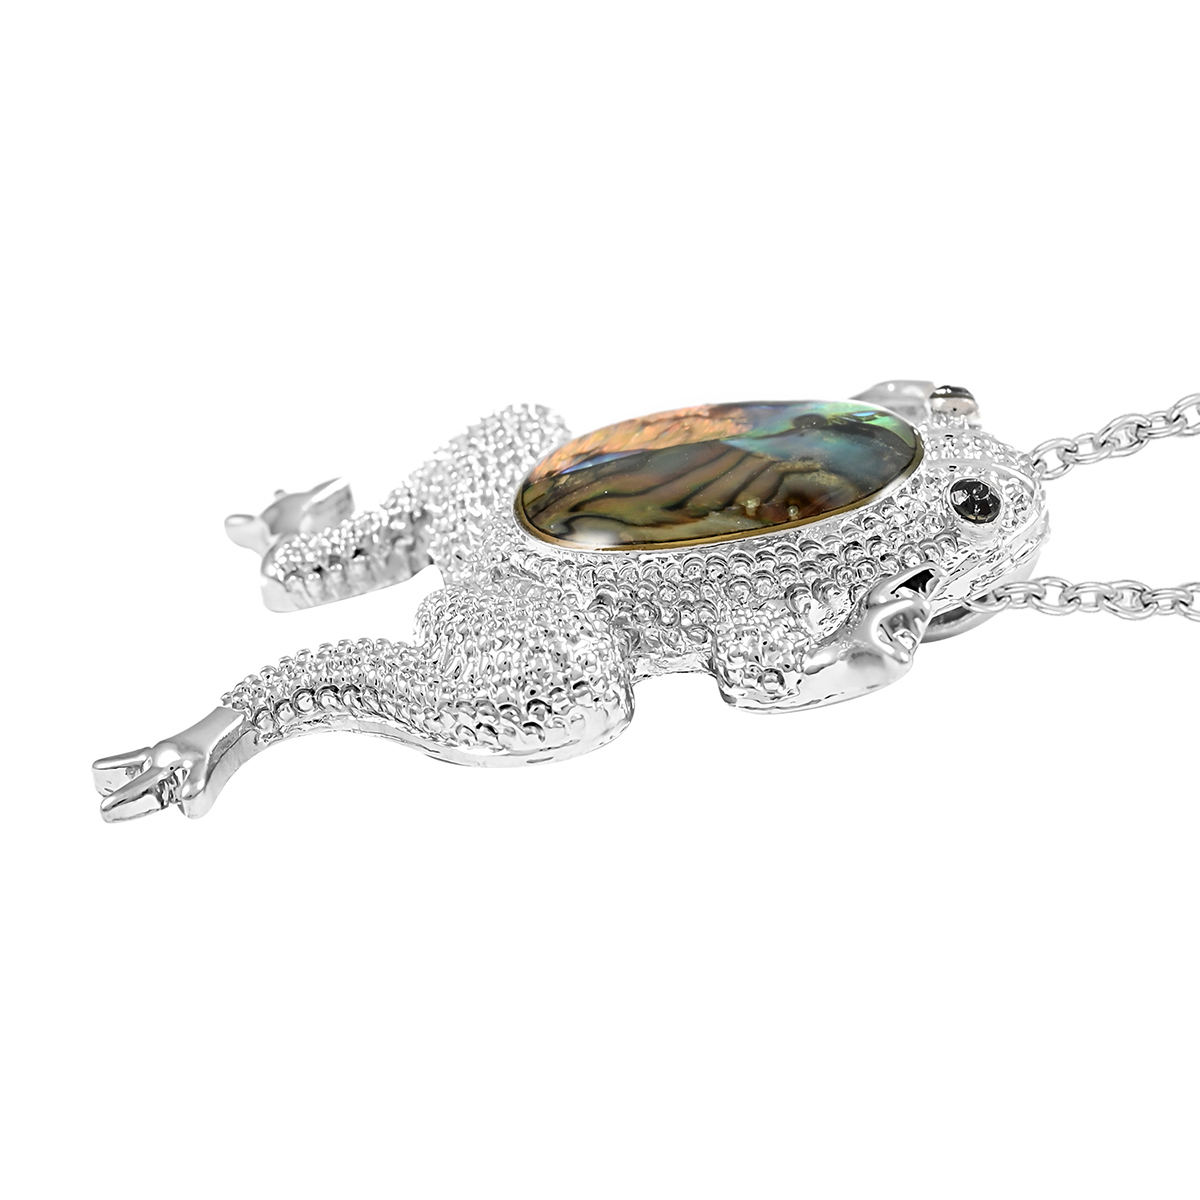 Abalone Shell Frog Pendant Necklace